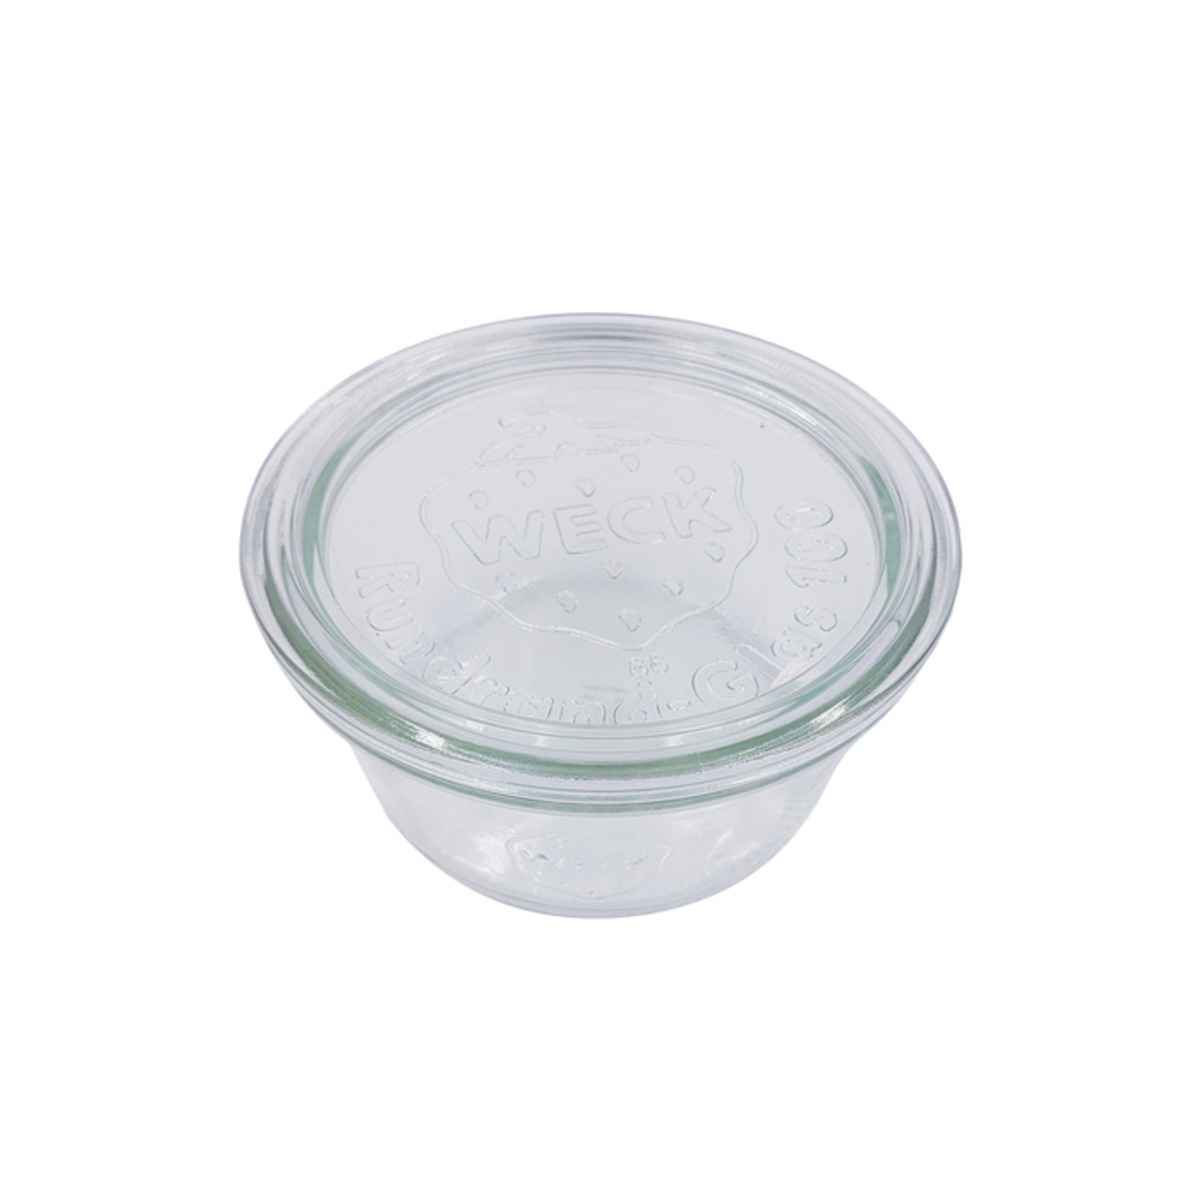 Picture of Packnwood 294WEK740 3.93 Dia. x 2.28 in. 9.8 oz Bokocook Reusable Weck Jars with Glass Lid Mold - 6 Piece